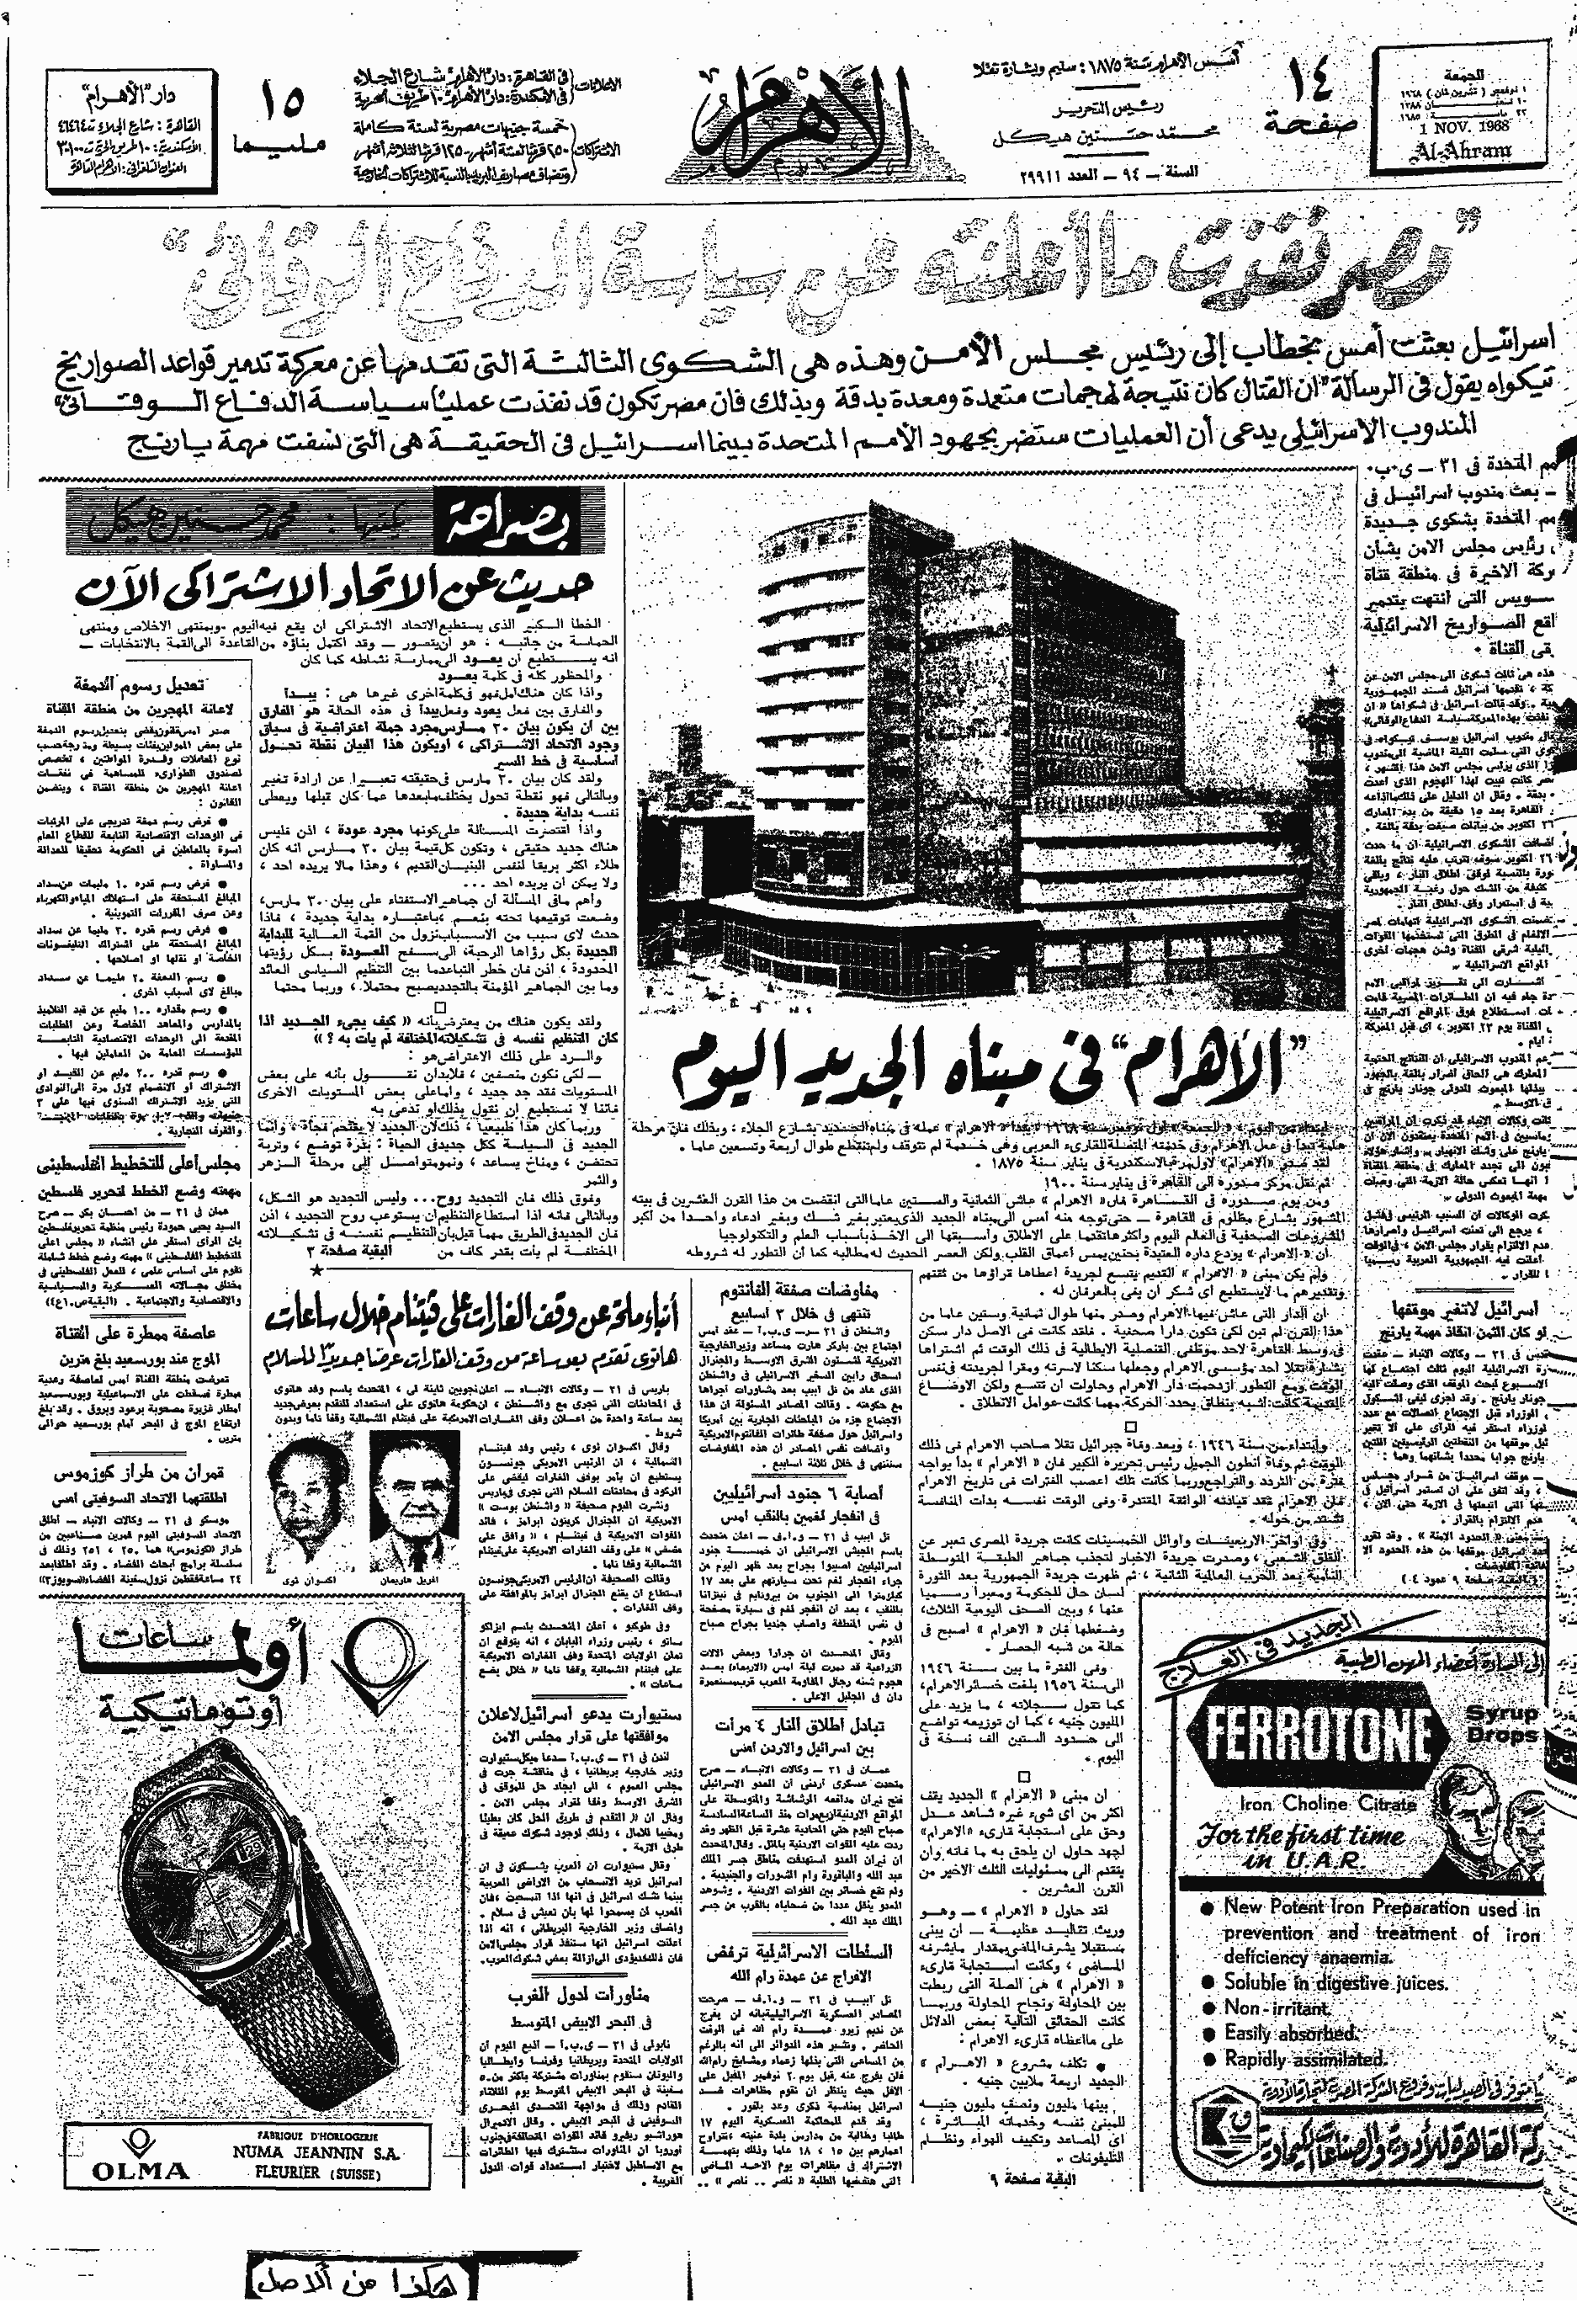 Four title pages of Al-Ahram from November 1968.